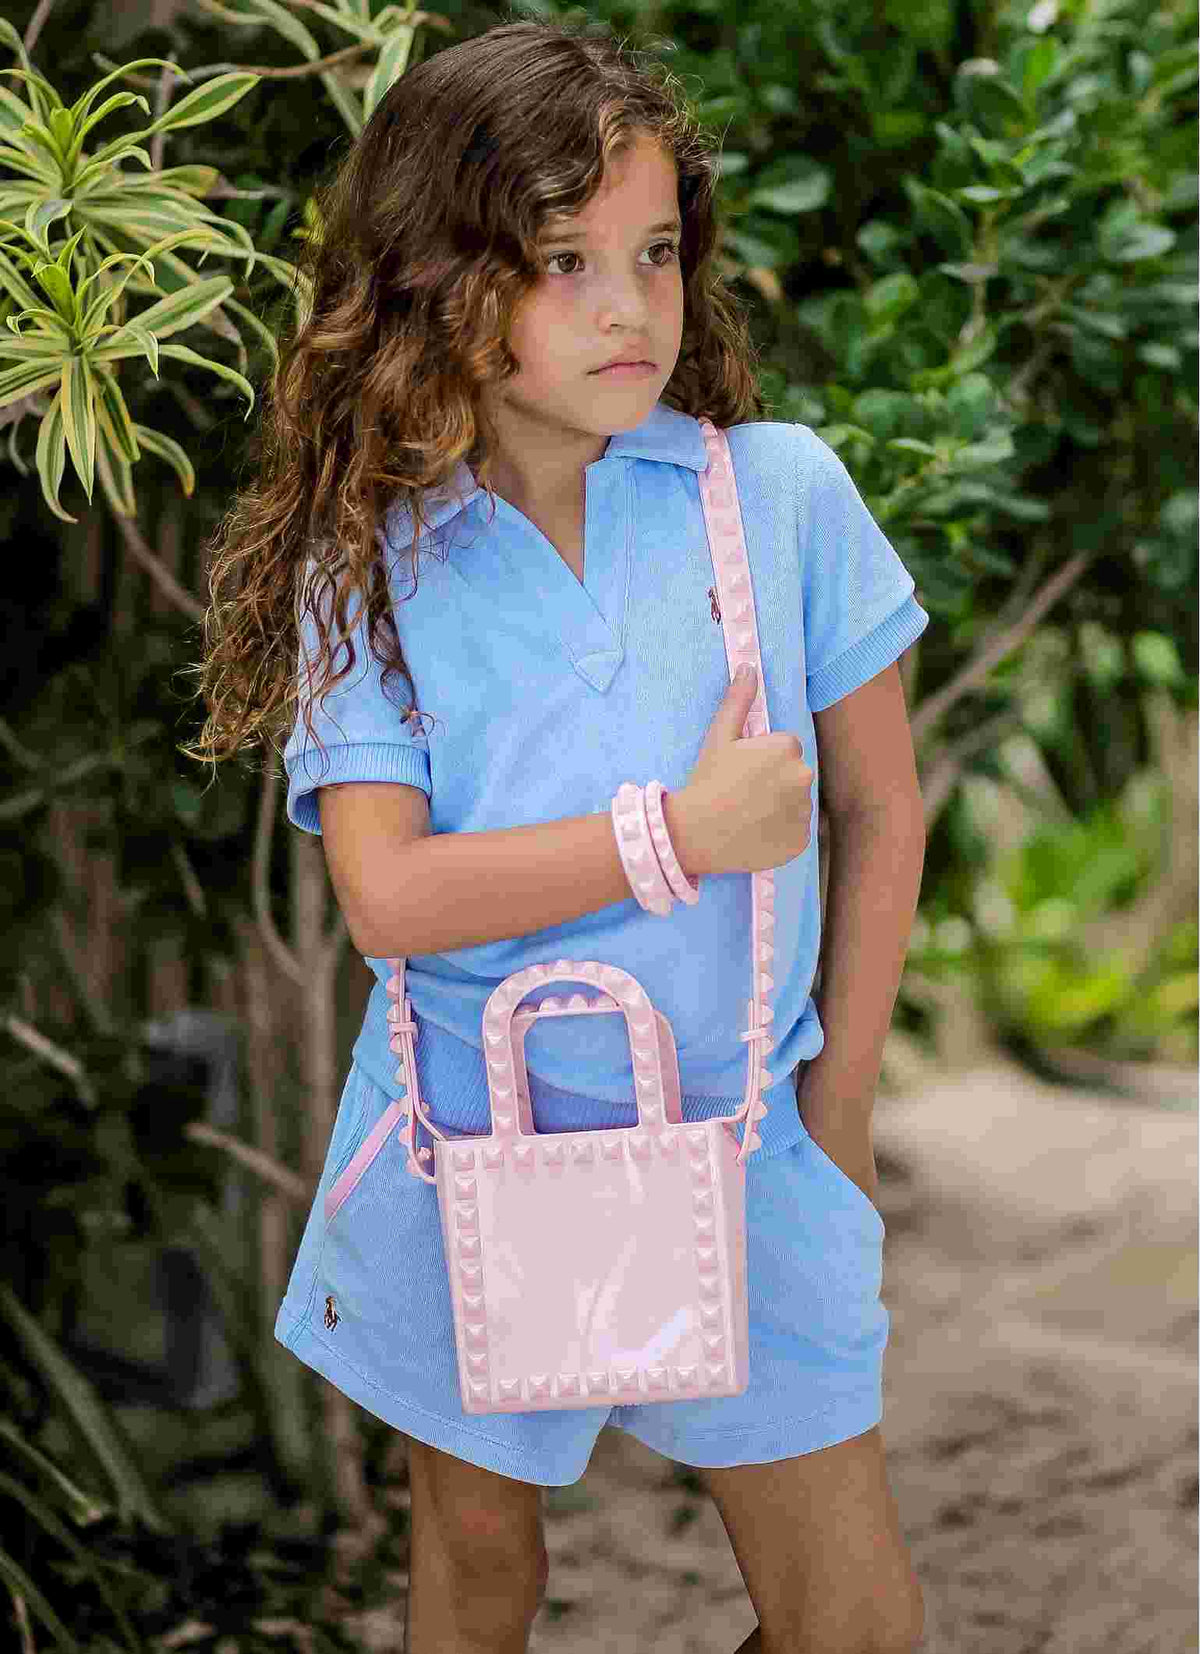 Alice kids shoulder bags perfect for vacation. Minicarmensol jelly crossbody bag comfort for kids.